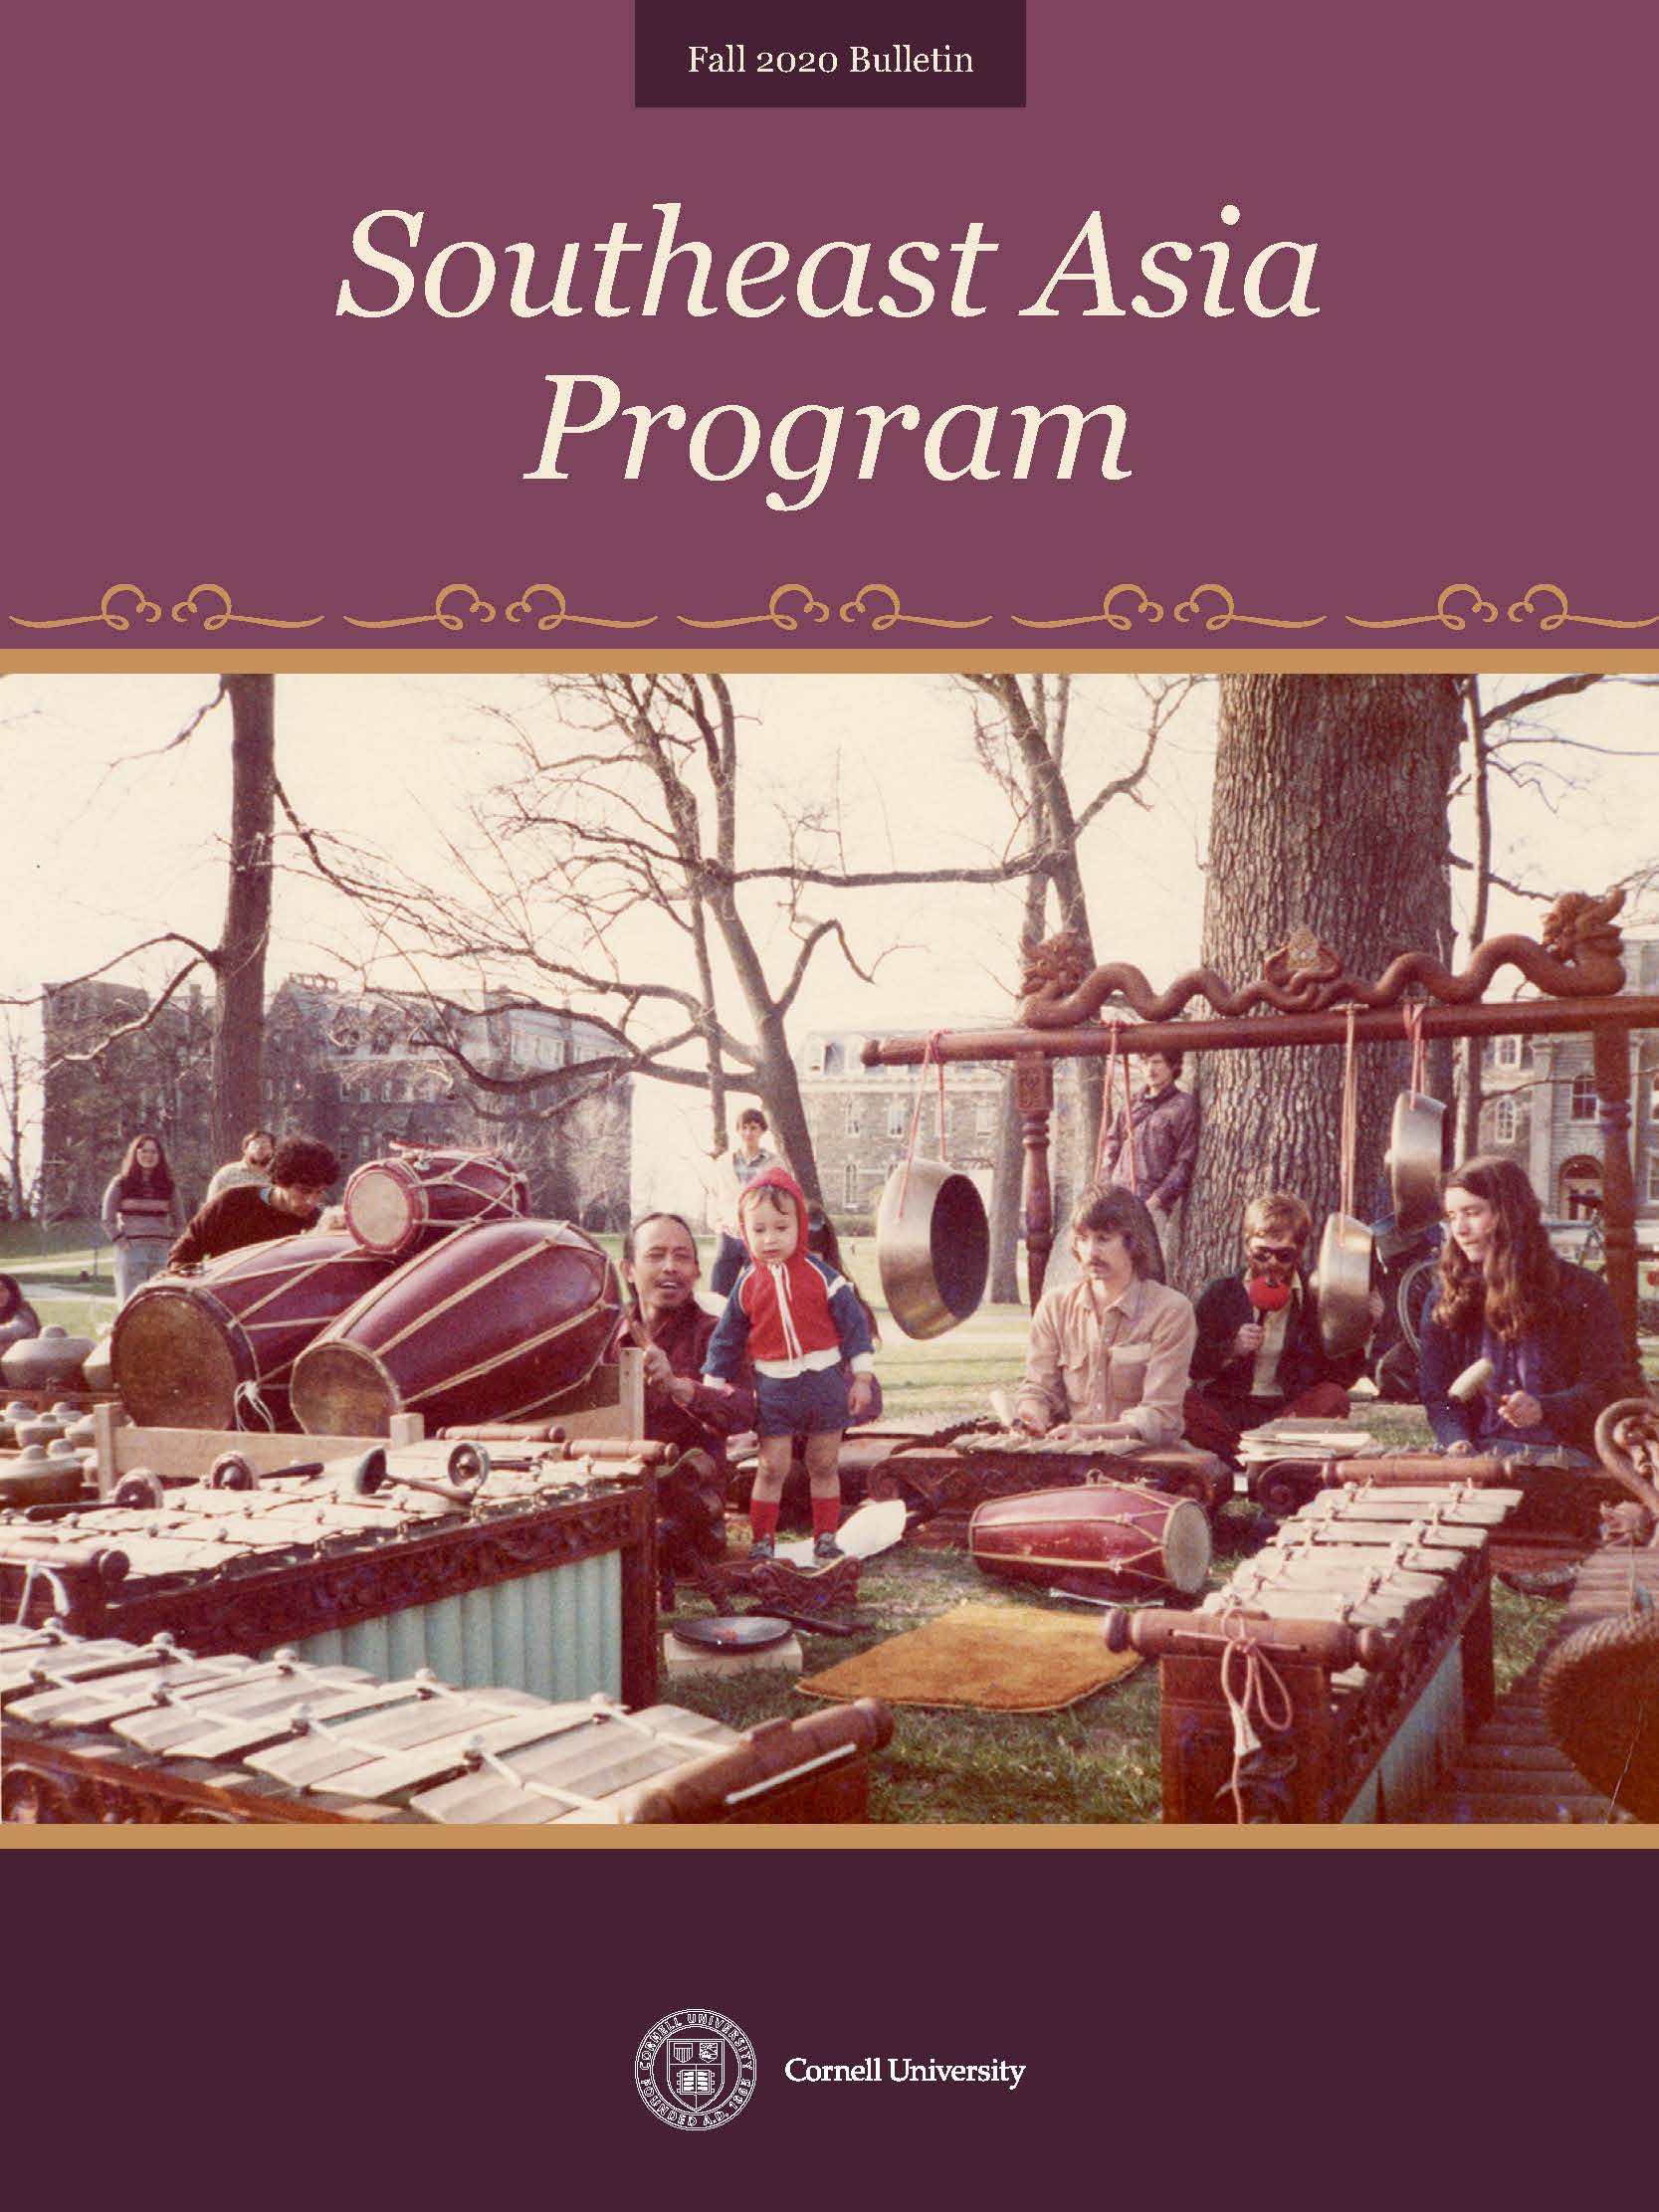 gamelan on the quad in the 1970s on SEAP bulletin cover